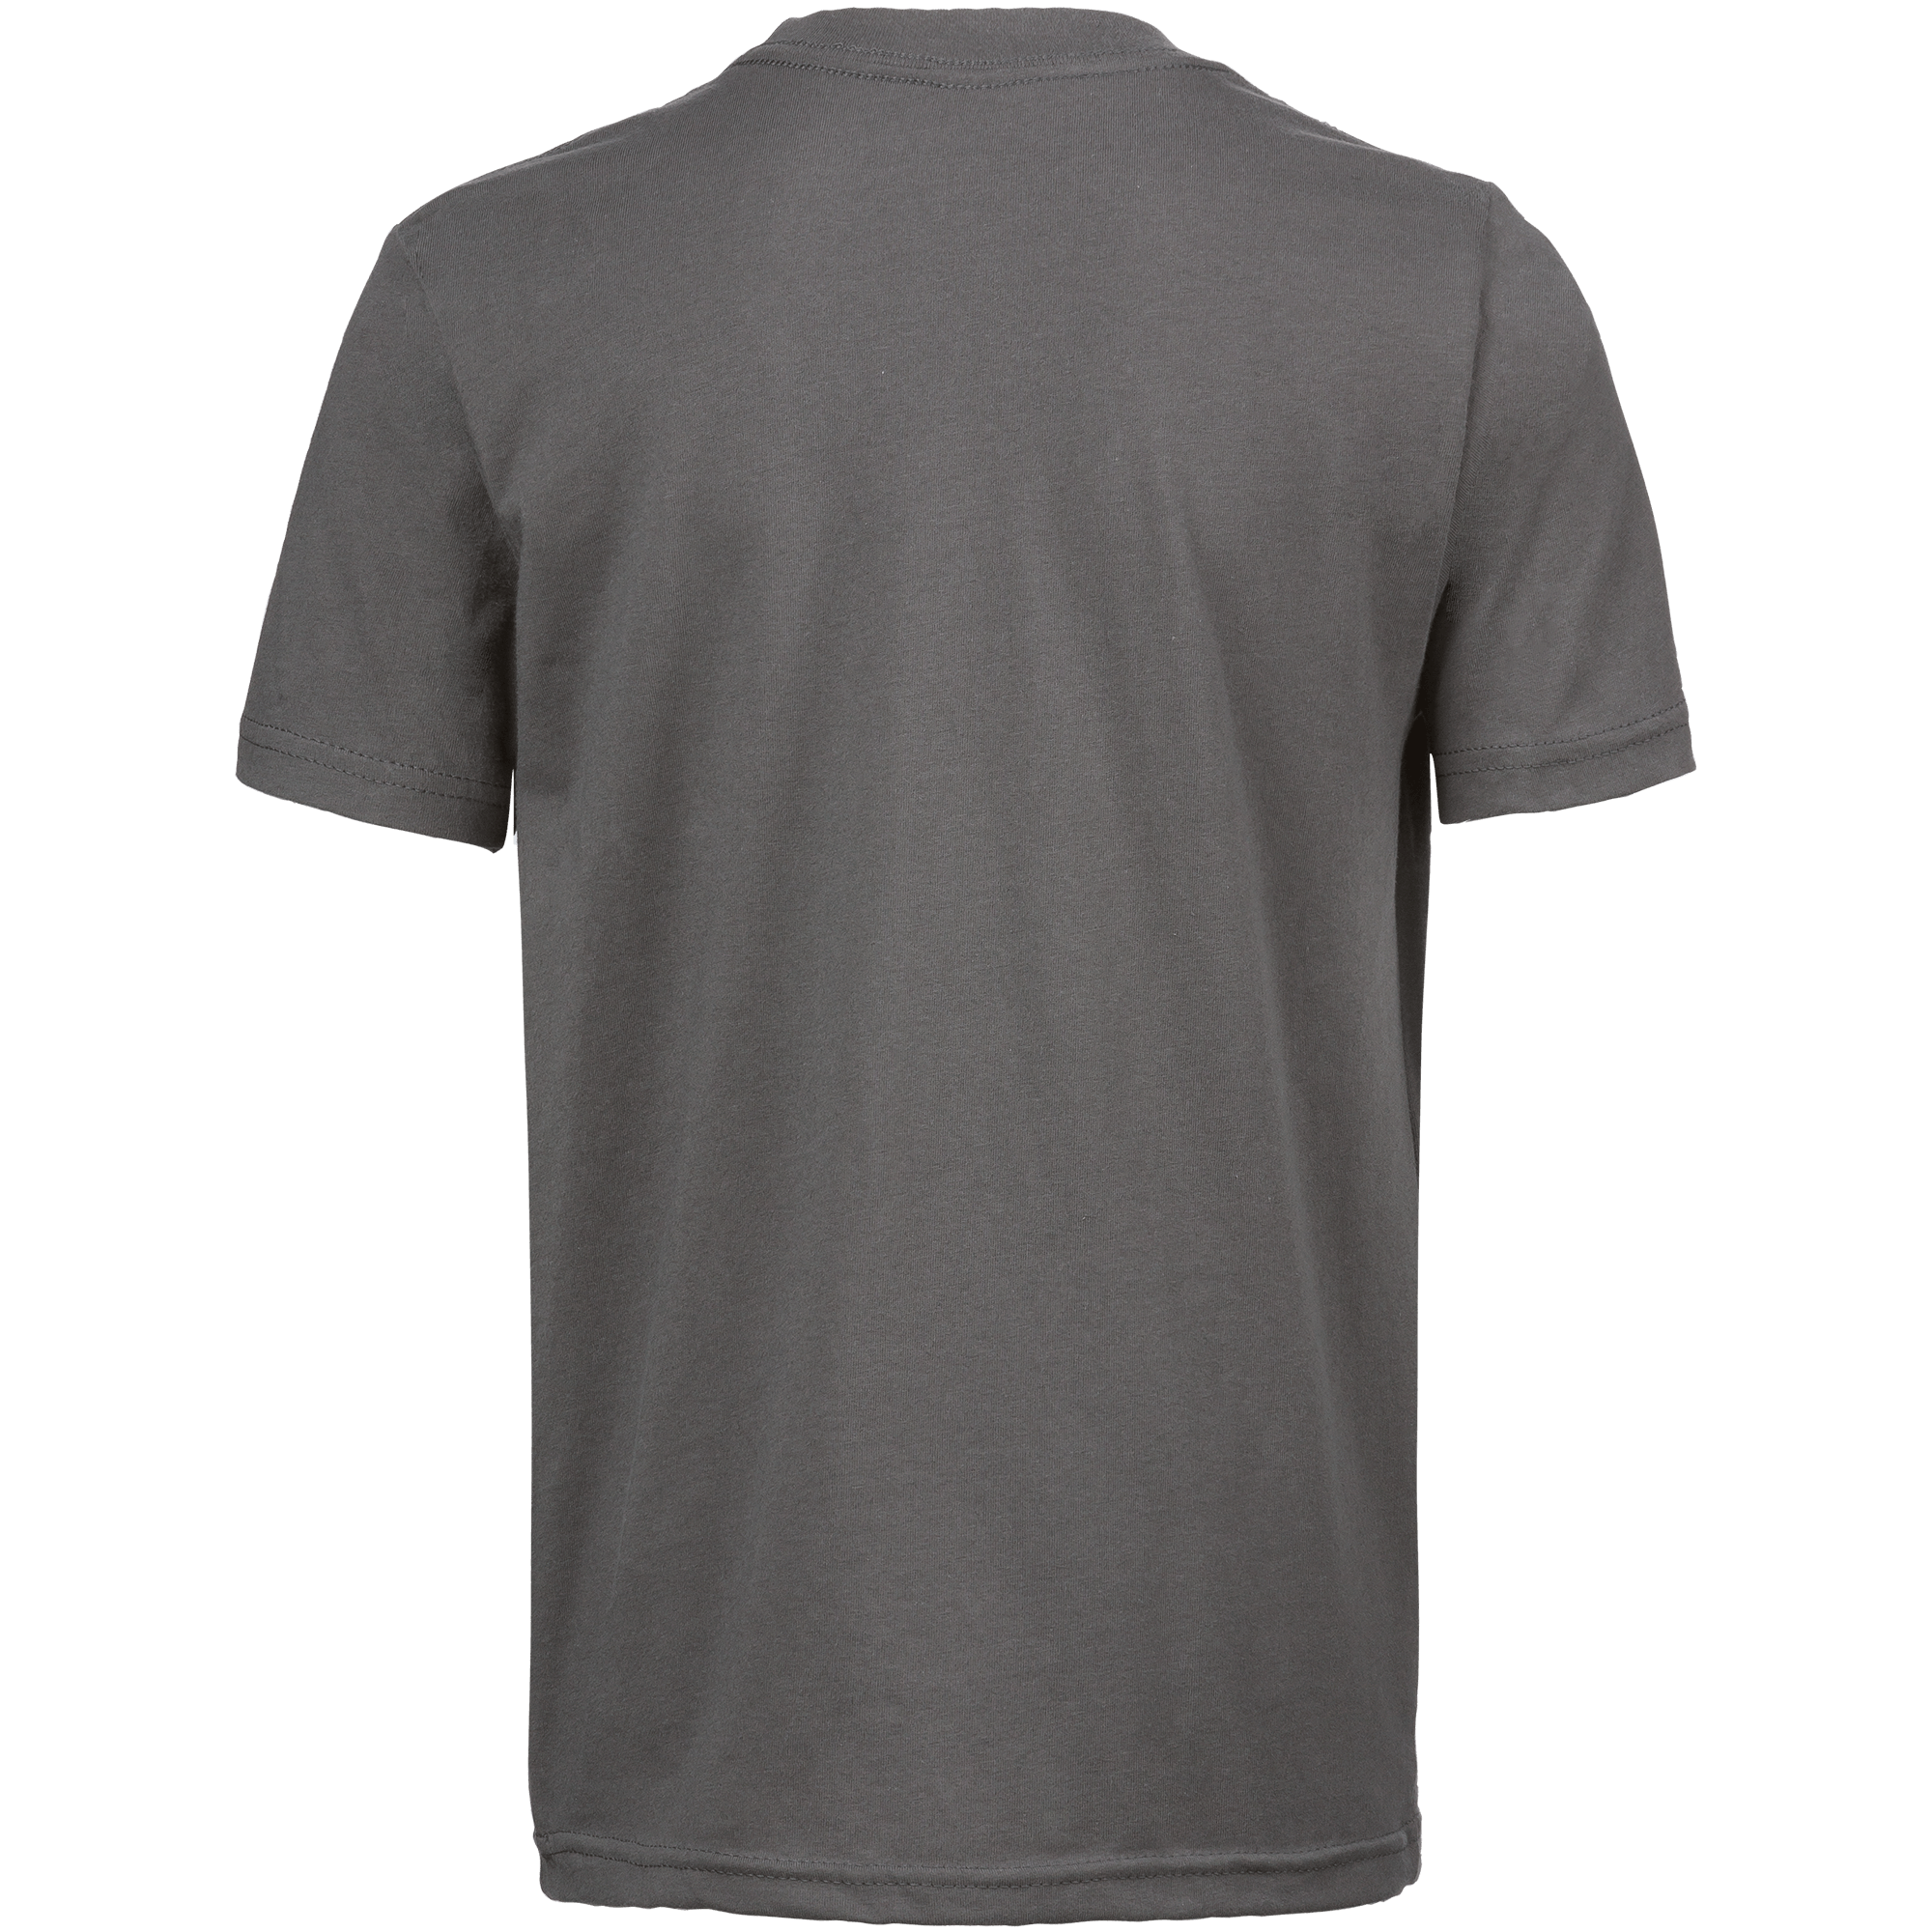 Tshirt Grey Back PNG Clipart Background